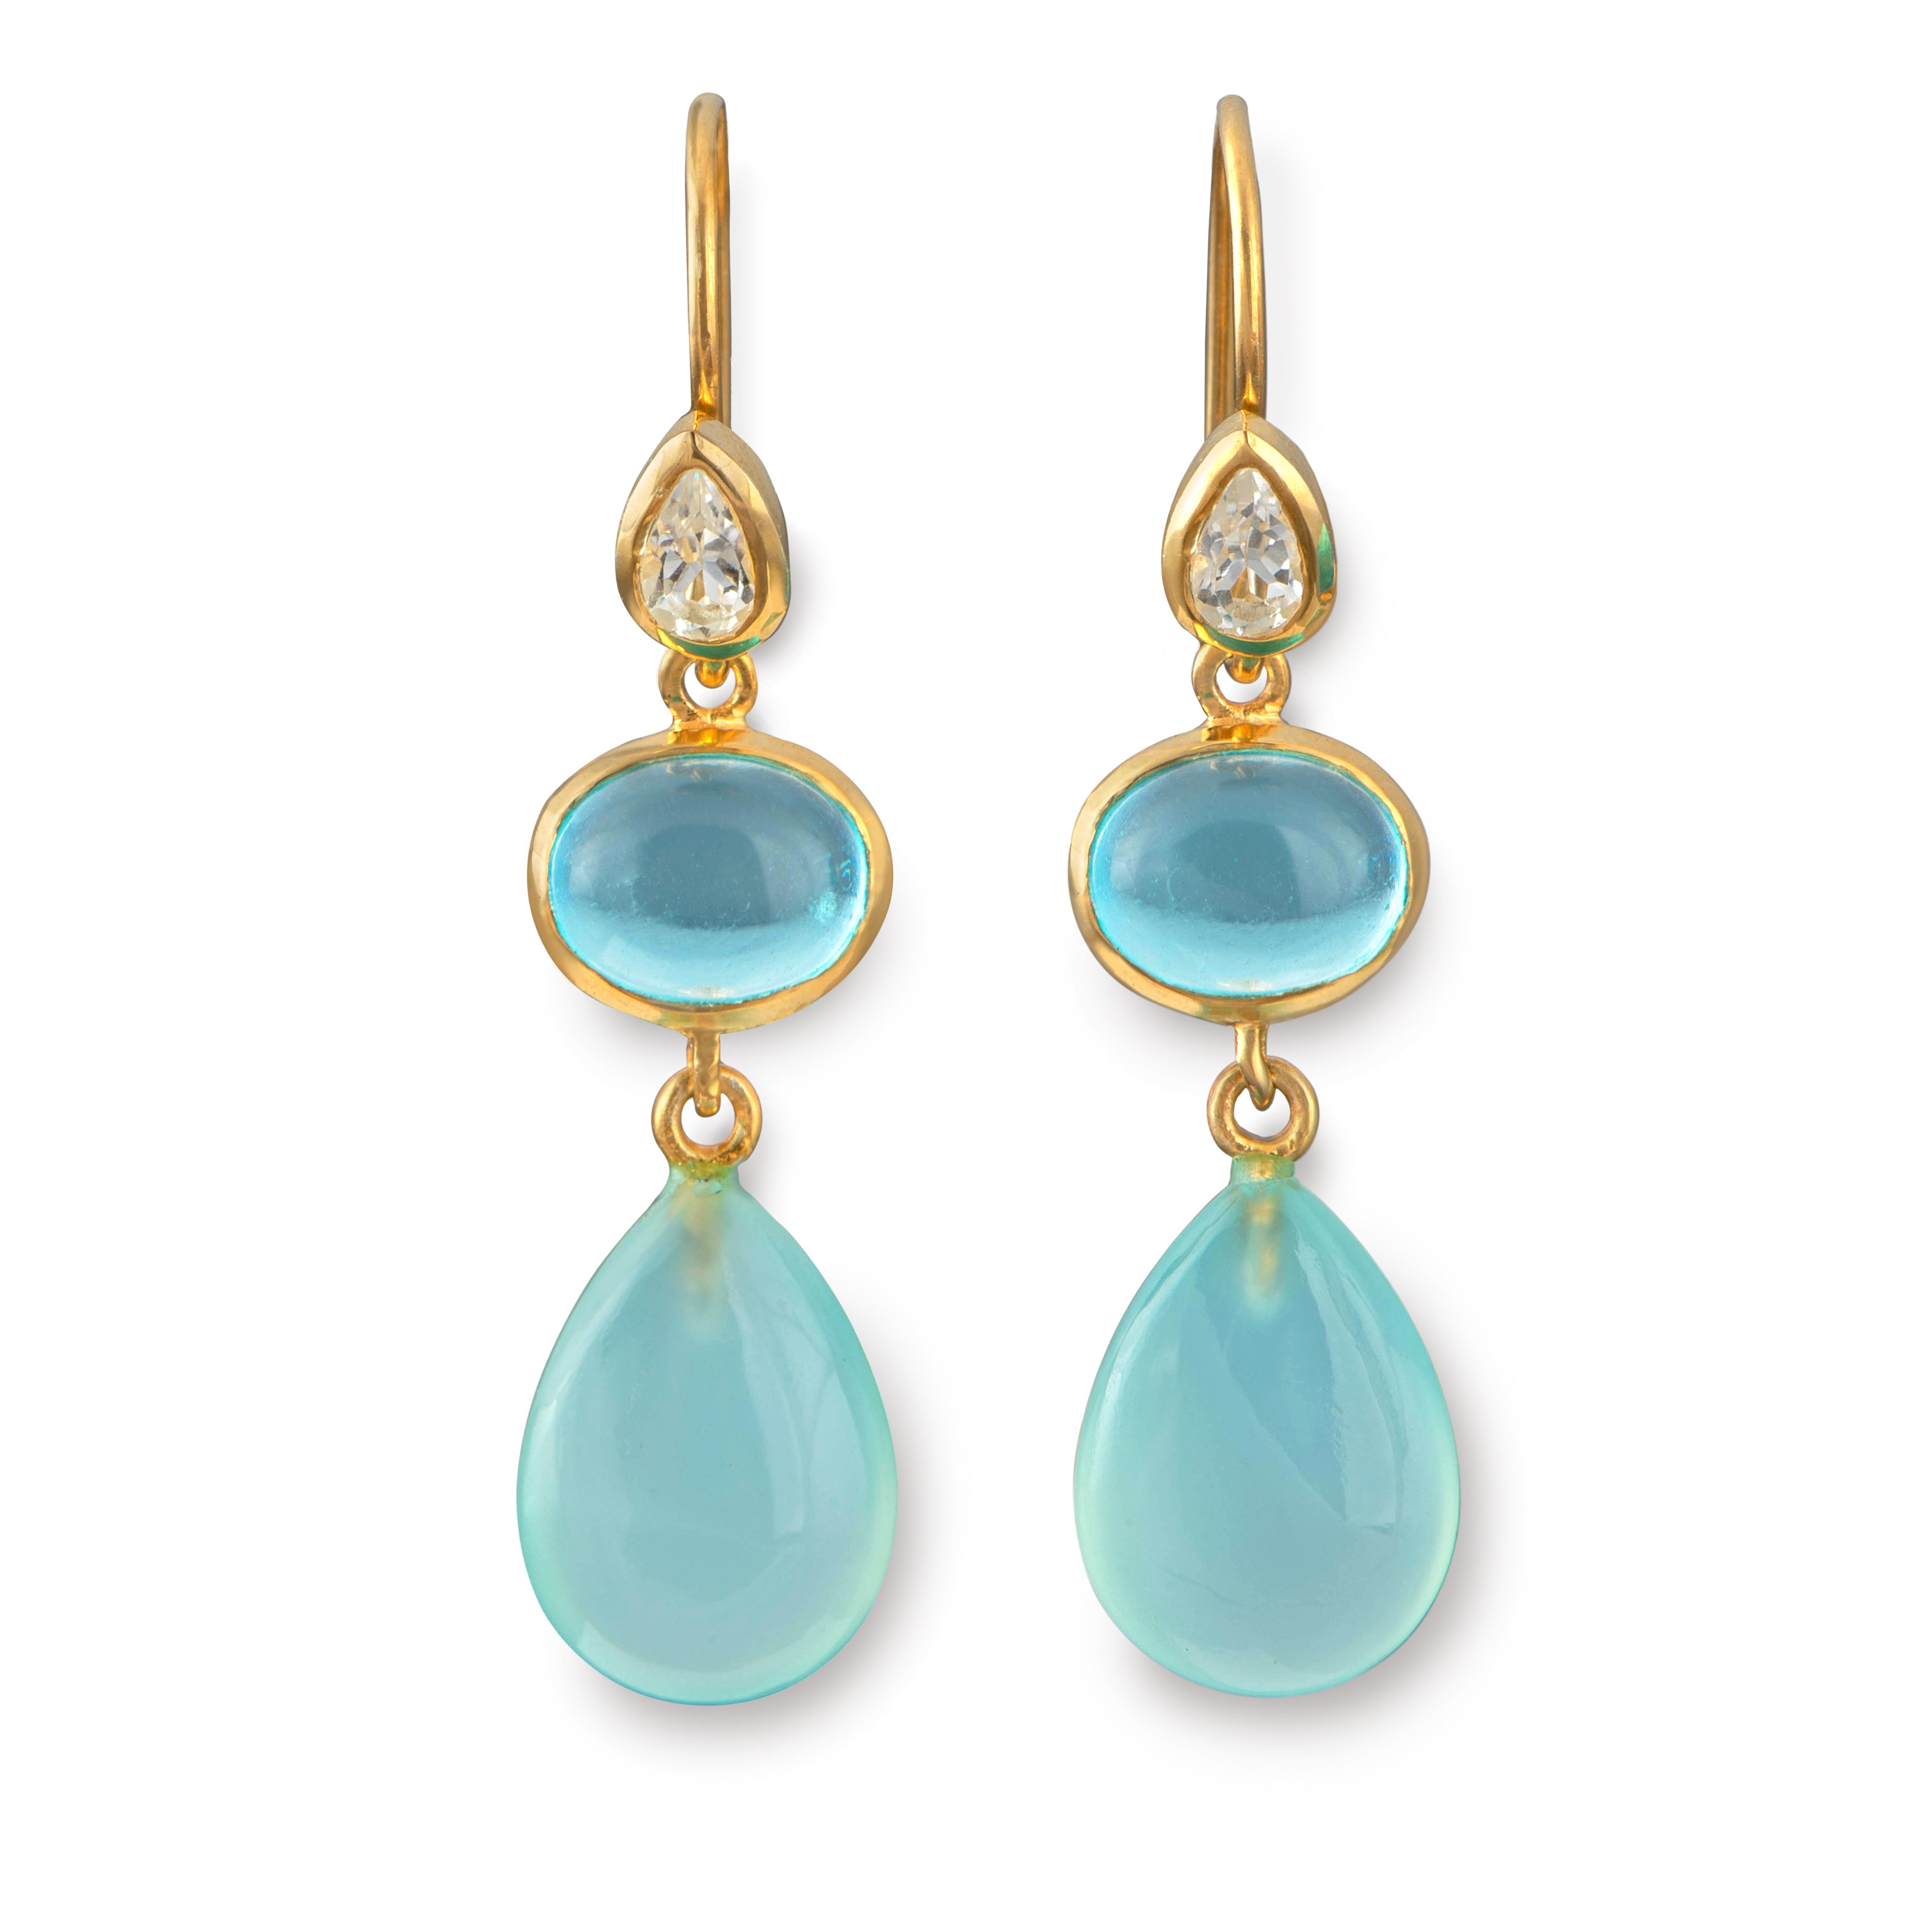 Long Hook Earrings 3 Stones - Faceted Rock Crystal, Cabochon Blue Topaz & Cabochon Aqua Chalcedony